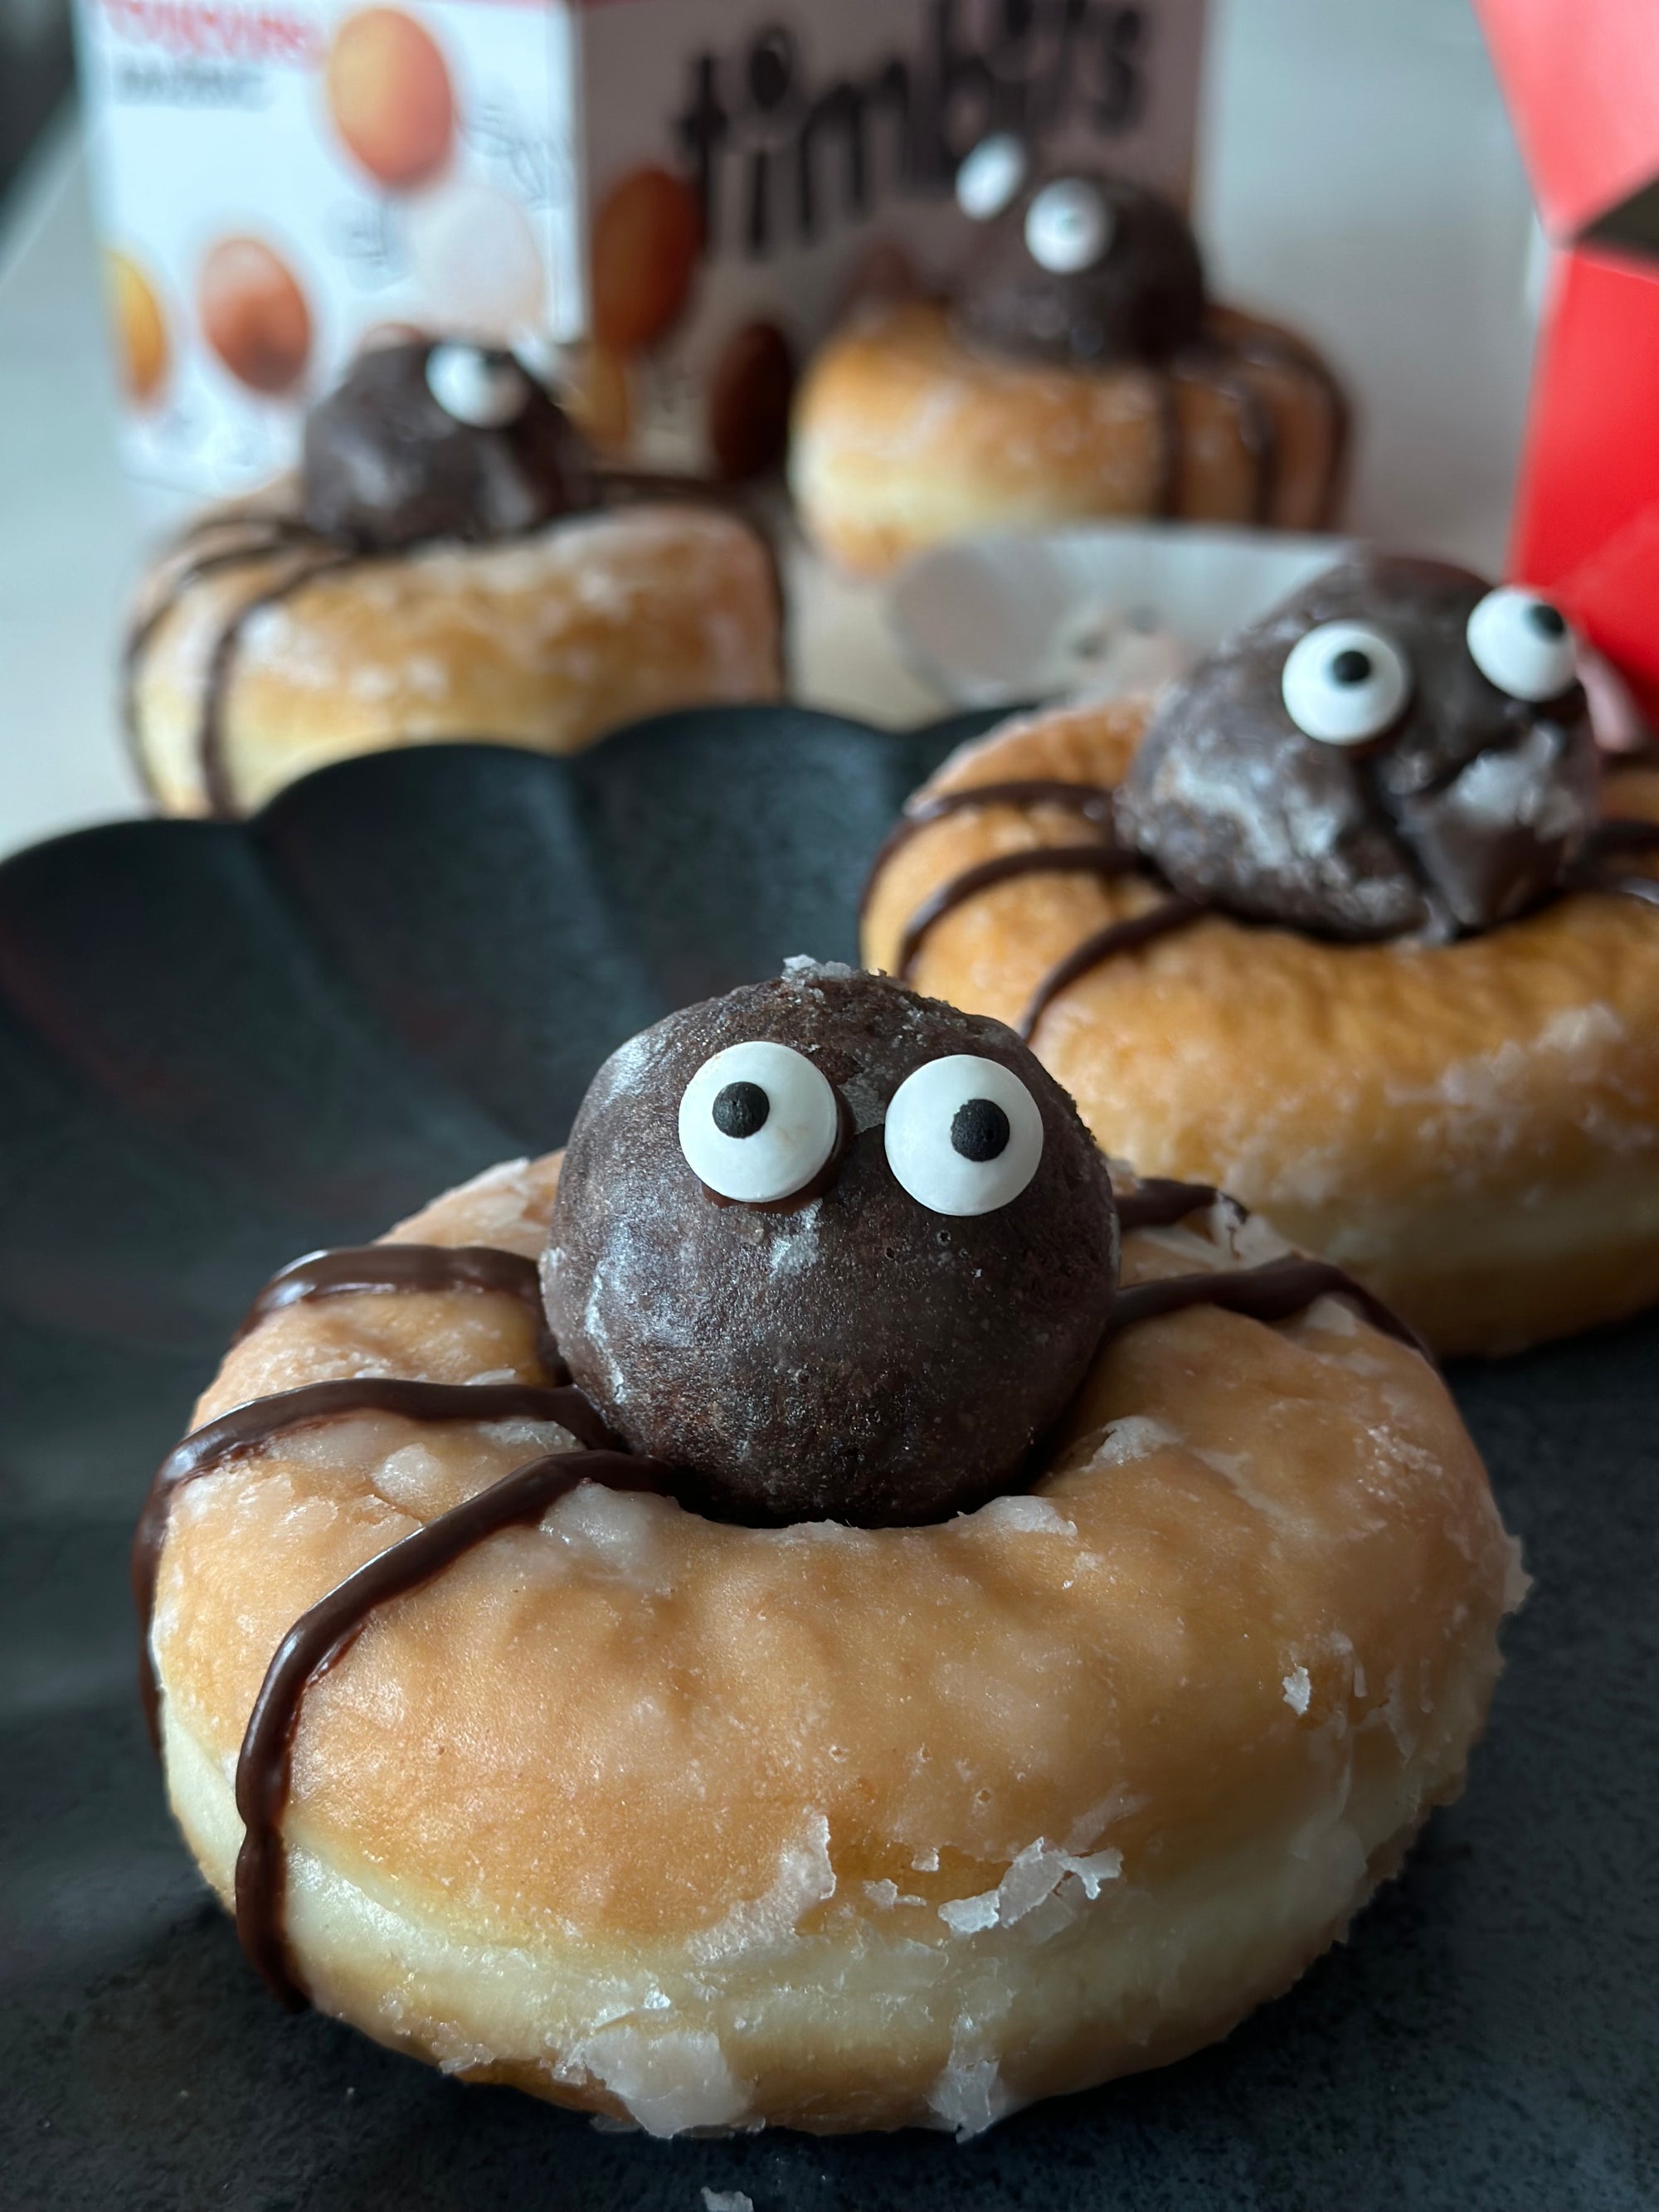 Spider Donut Decorating: A Spooktacular Treat for Donut Lovers